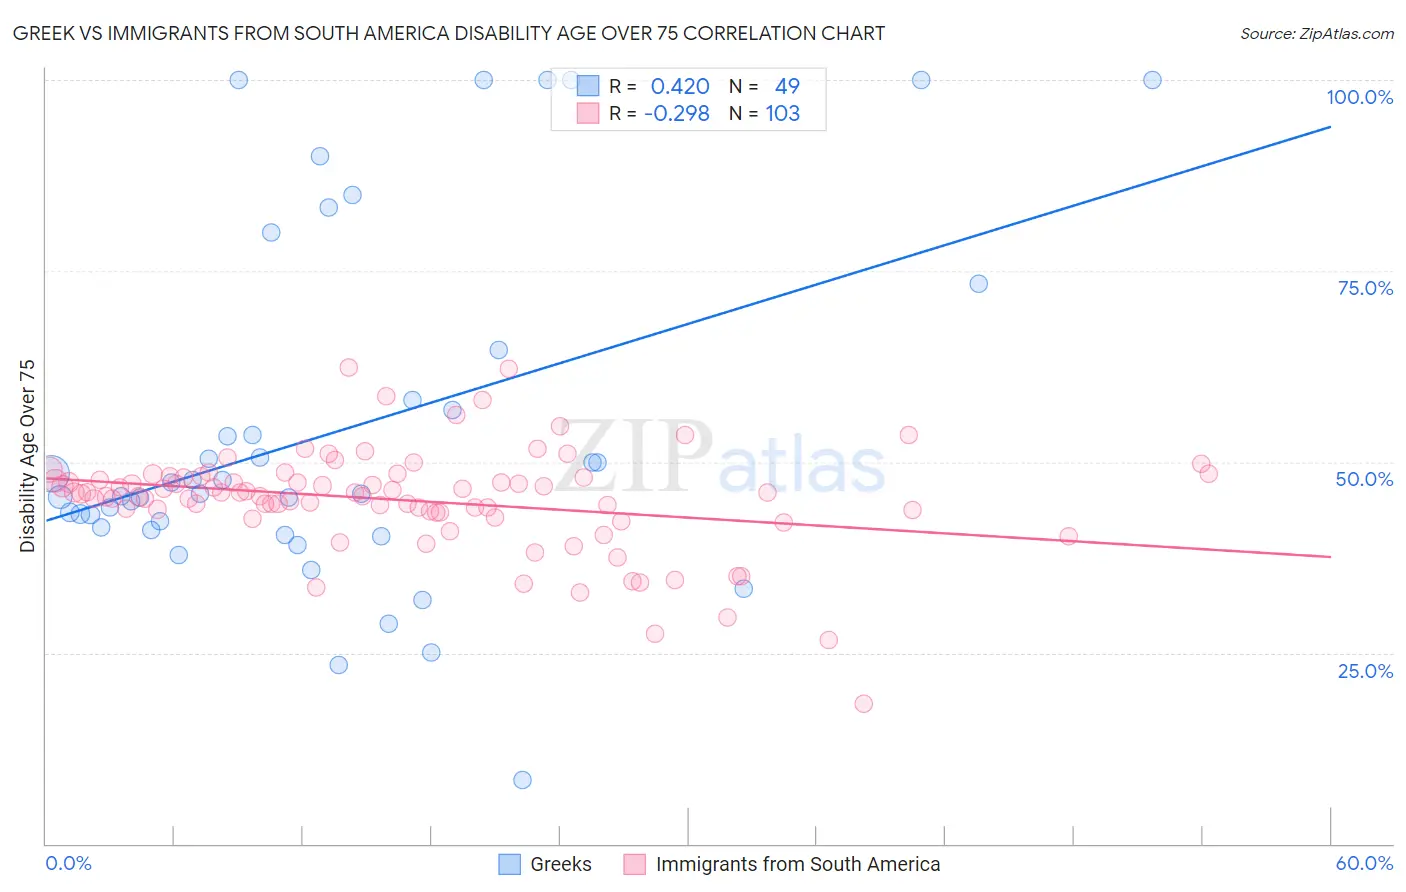 Greek vs Immigrants from South America Disability Age Over 75